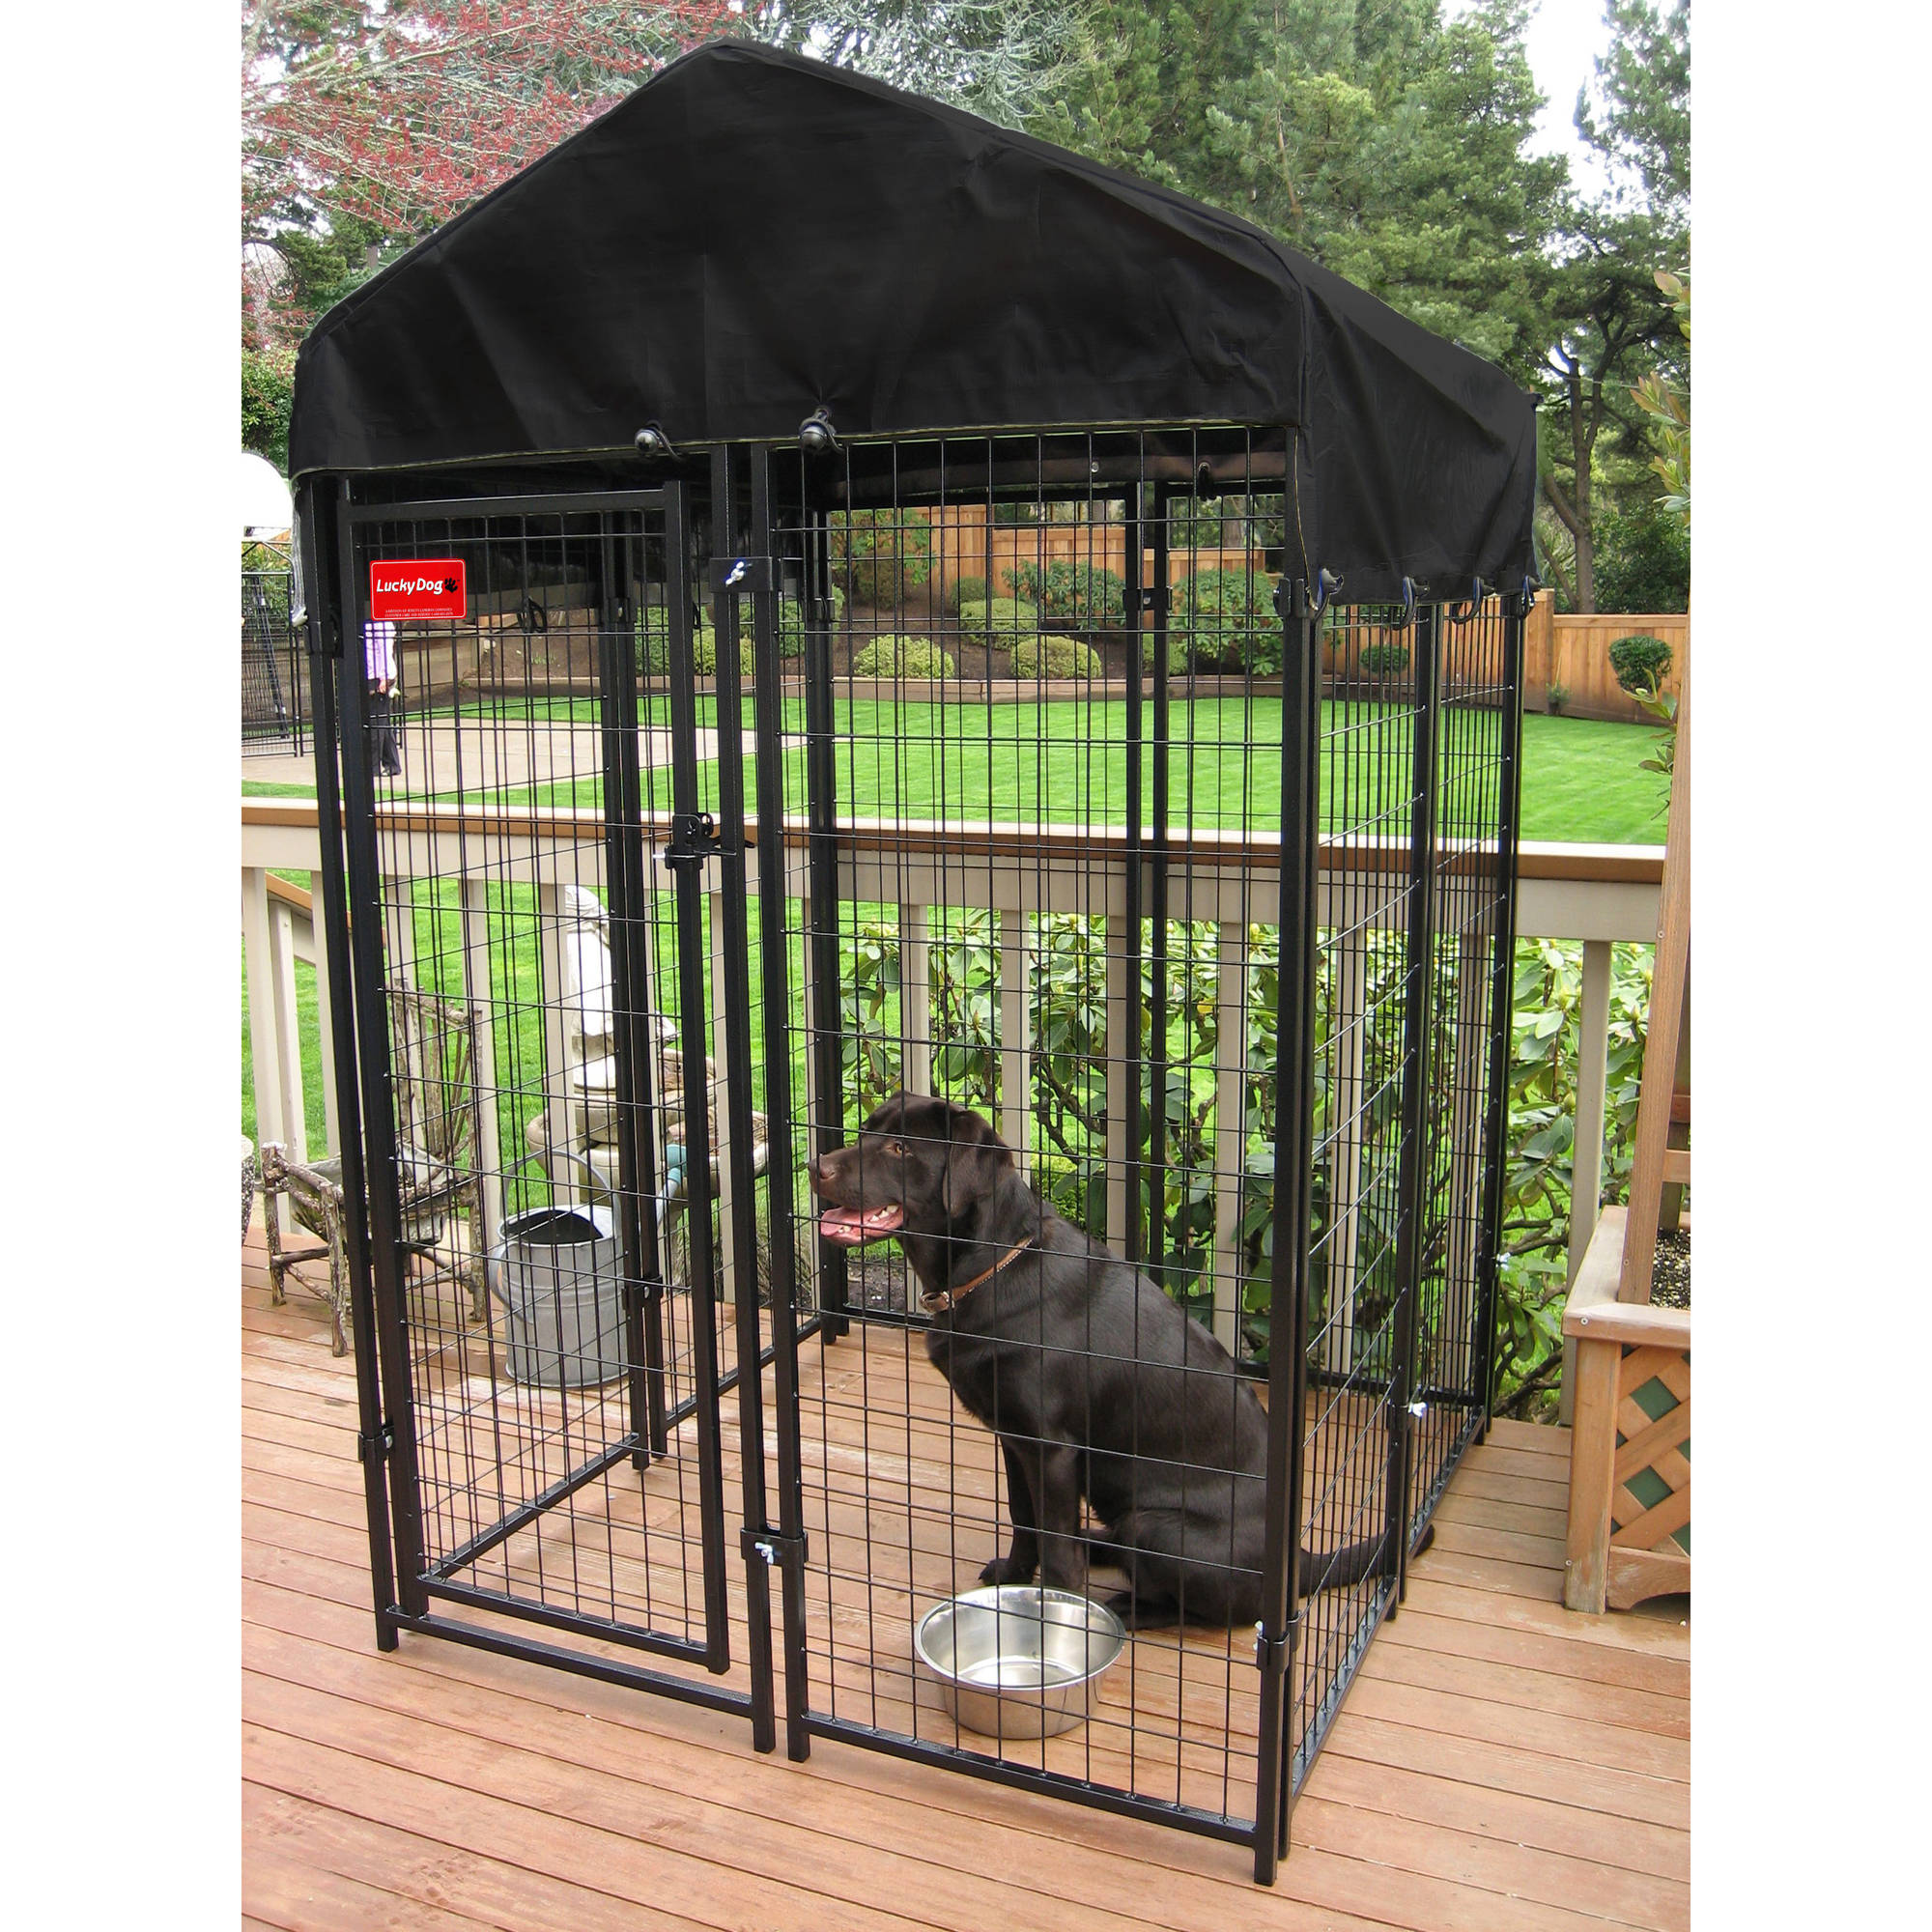 Lucky Dog Uptown Welded Wire Dog Kennel w/ Cover, 6'H x 4'W x 4'L - image 4 of 5